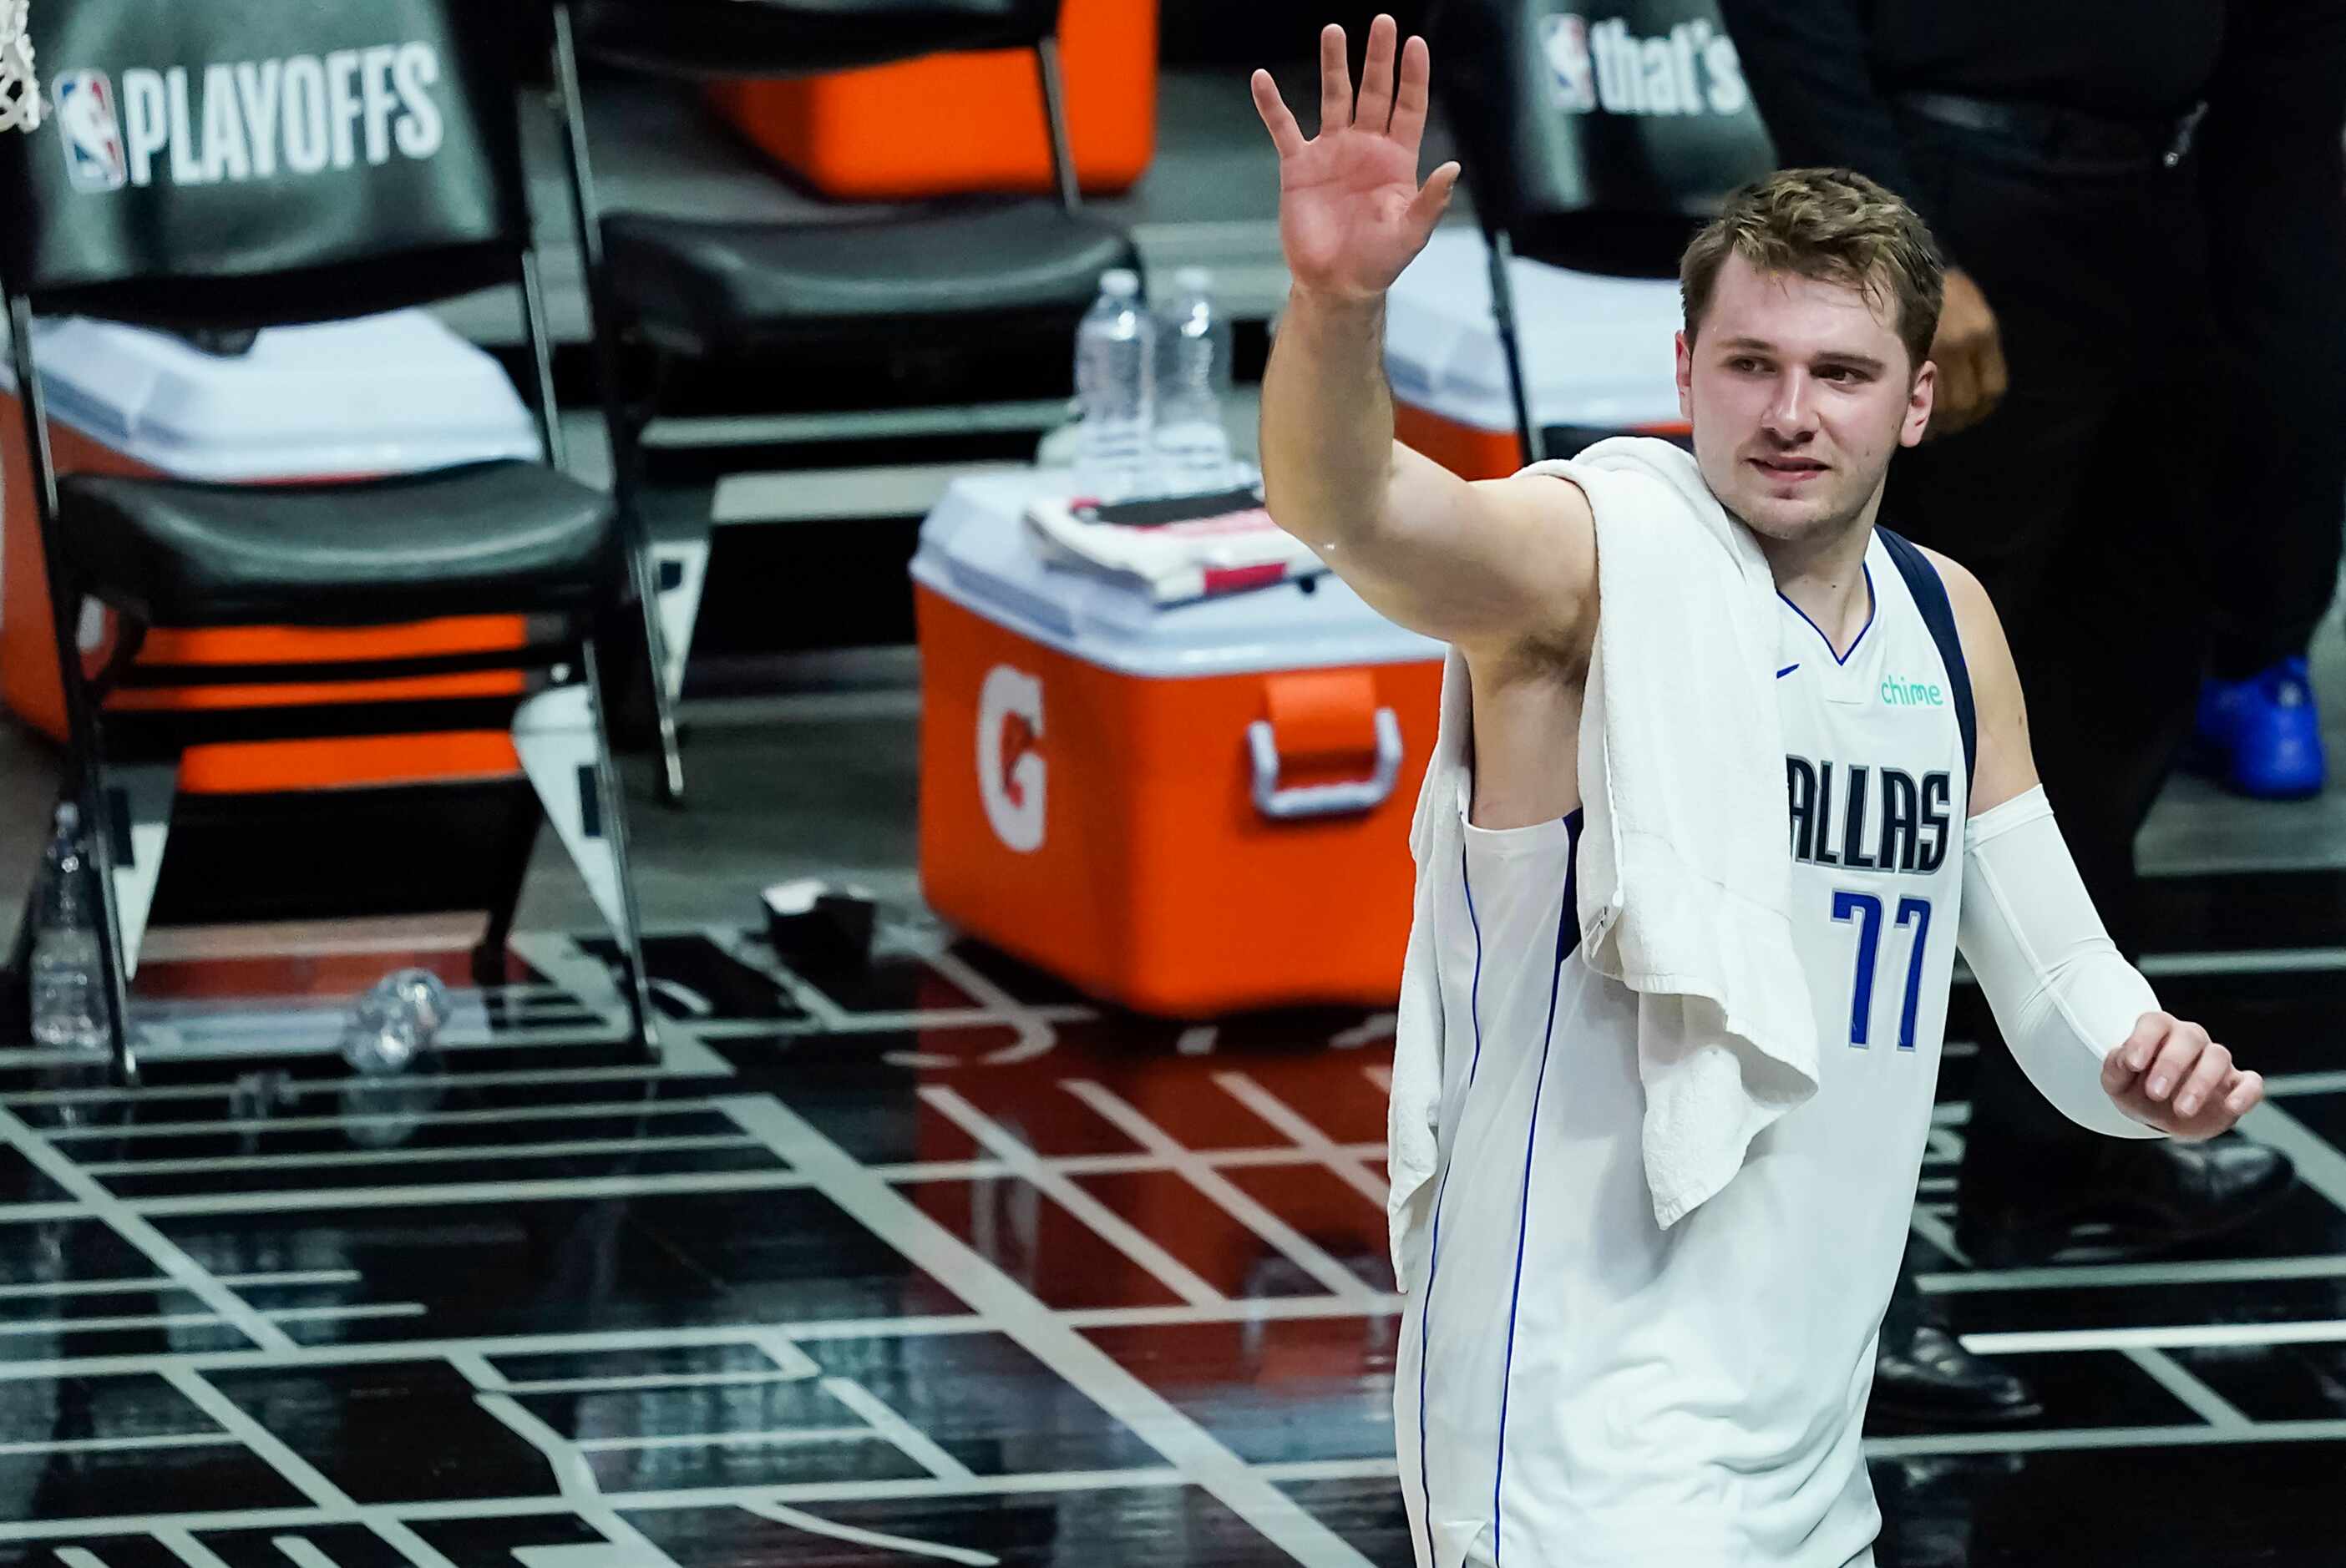 Dallas Mavericks guard Luka Doncic waves to fans as he leaves the court after a win over the...